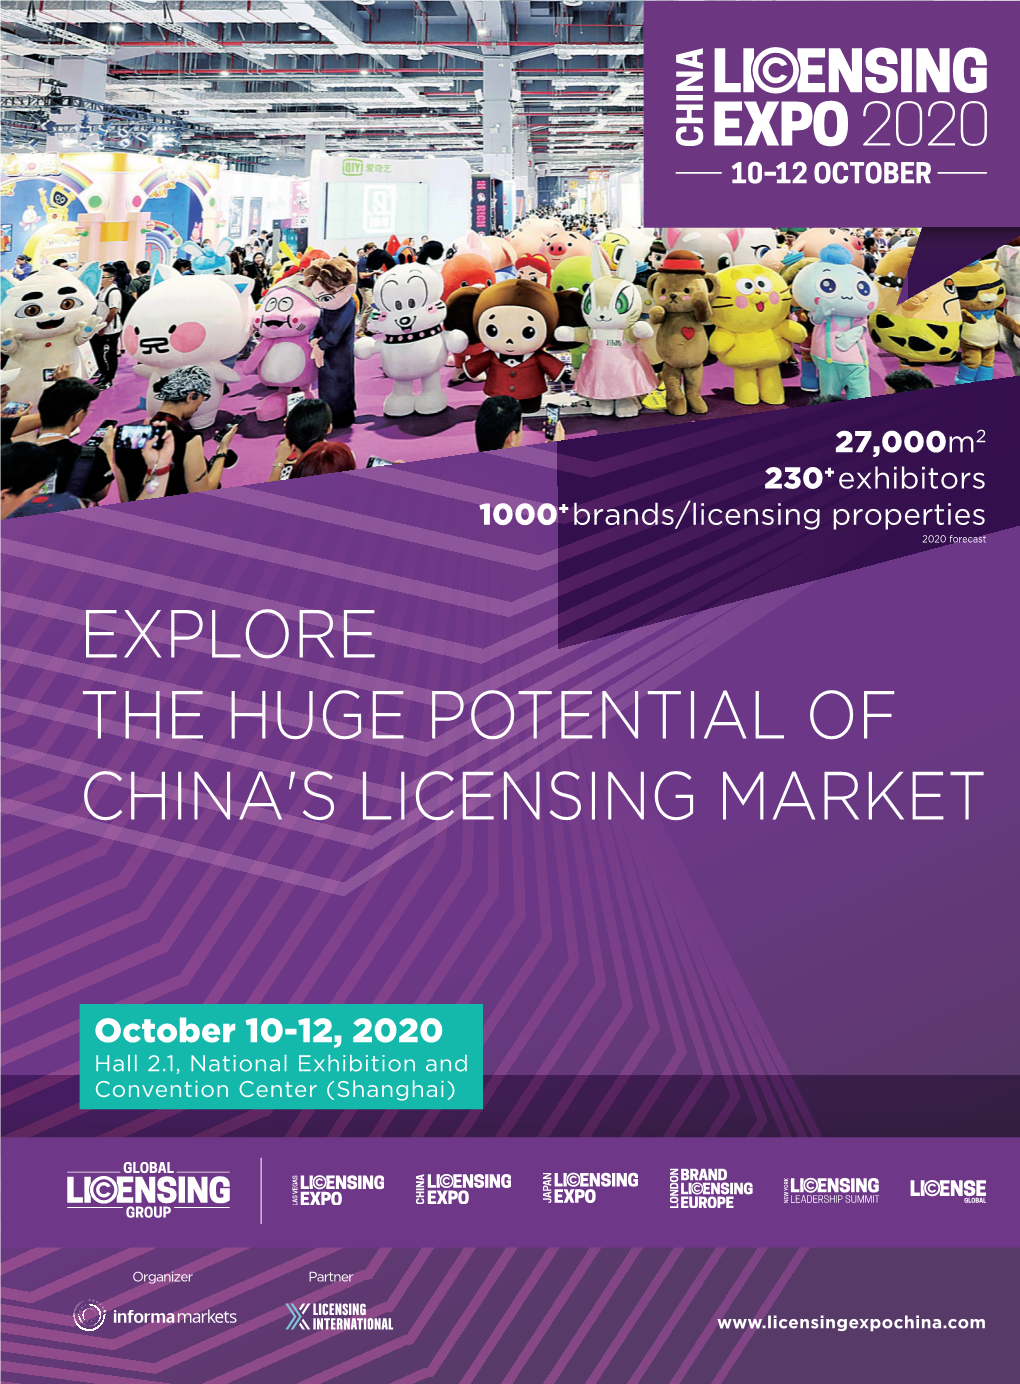 Explore the Huge Potential of China's Licensing Market